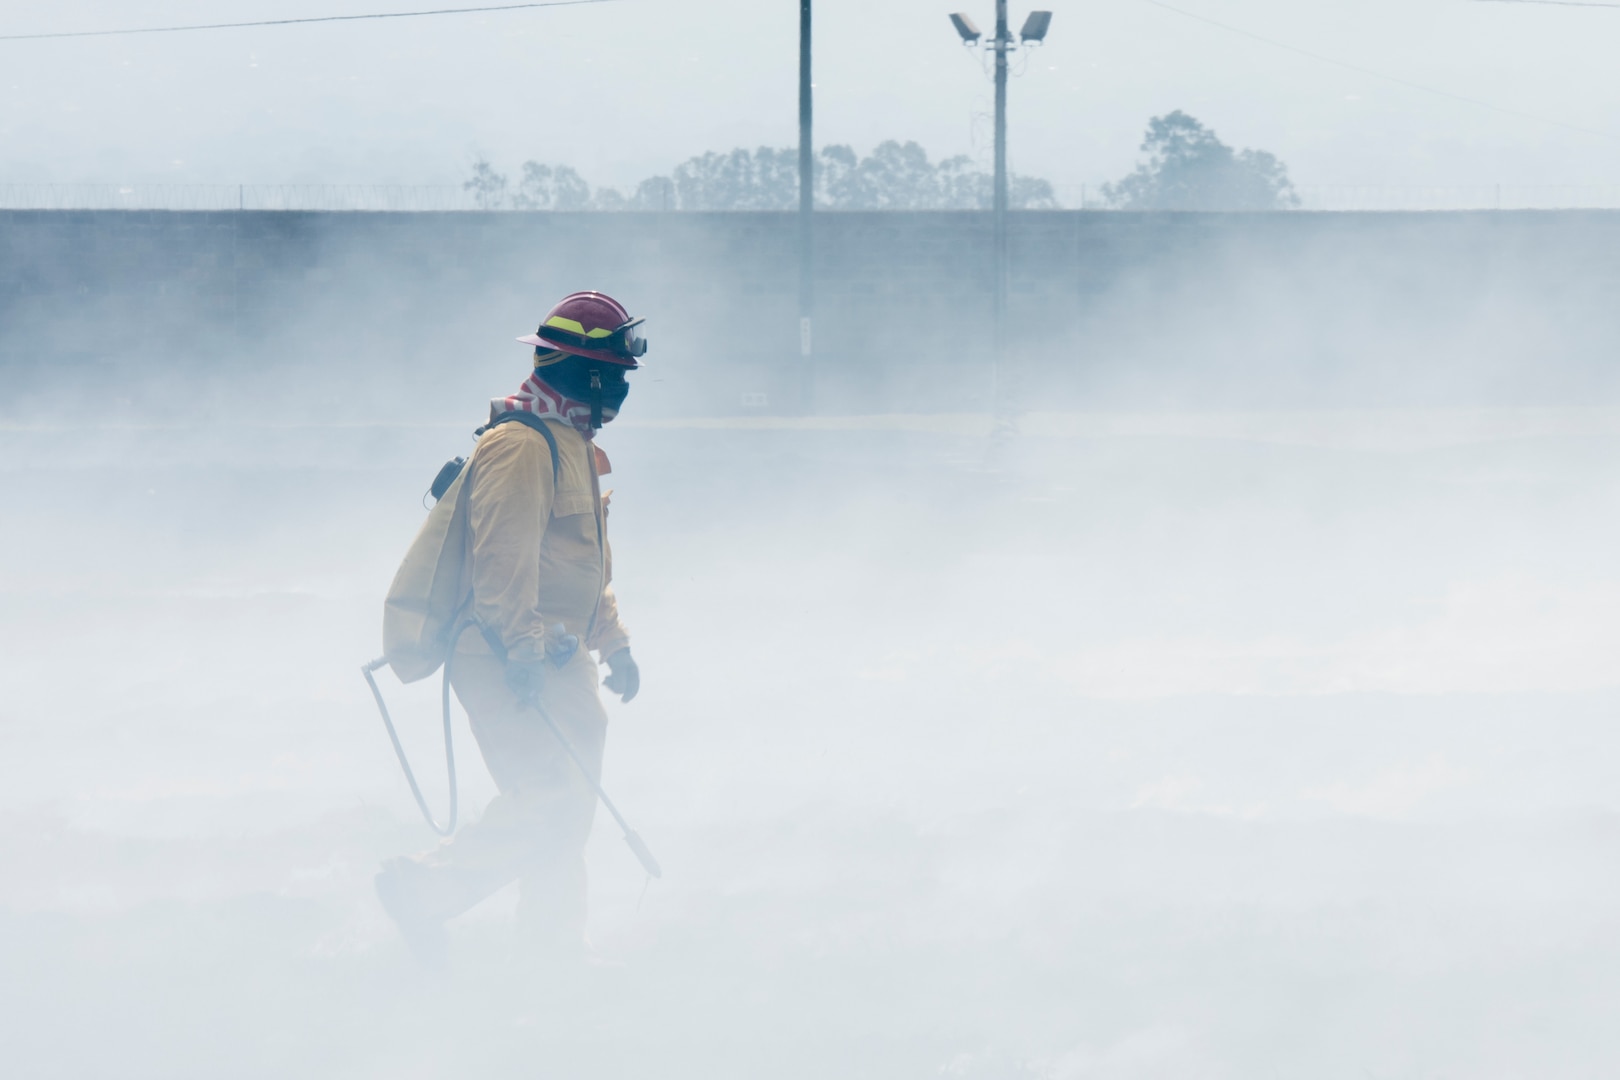 A Central American firefighter surveys the ground for traces of flames after a wildlands fire training during the Central America Sharing Mutual Operational Knowledge and Experiences (CENTAM SMOKE) exercise, April 11, 2019, at Soto Cano Air Base, Honduras. CENTAM SMOKE brought together firefighters from Honduras, Costa Rica, Belize, Guatemala and El Salvador to train with U.S. Air Force members as well as develop bonds and understandings of one another’s culture with team building exercises. The weeklong training included aircraft and structural fires, vehicle extrication, and a firefighter combat challenge. (U.S. Air Force photo by Staff Sgt. Eric Summers Jr.)